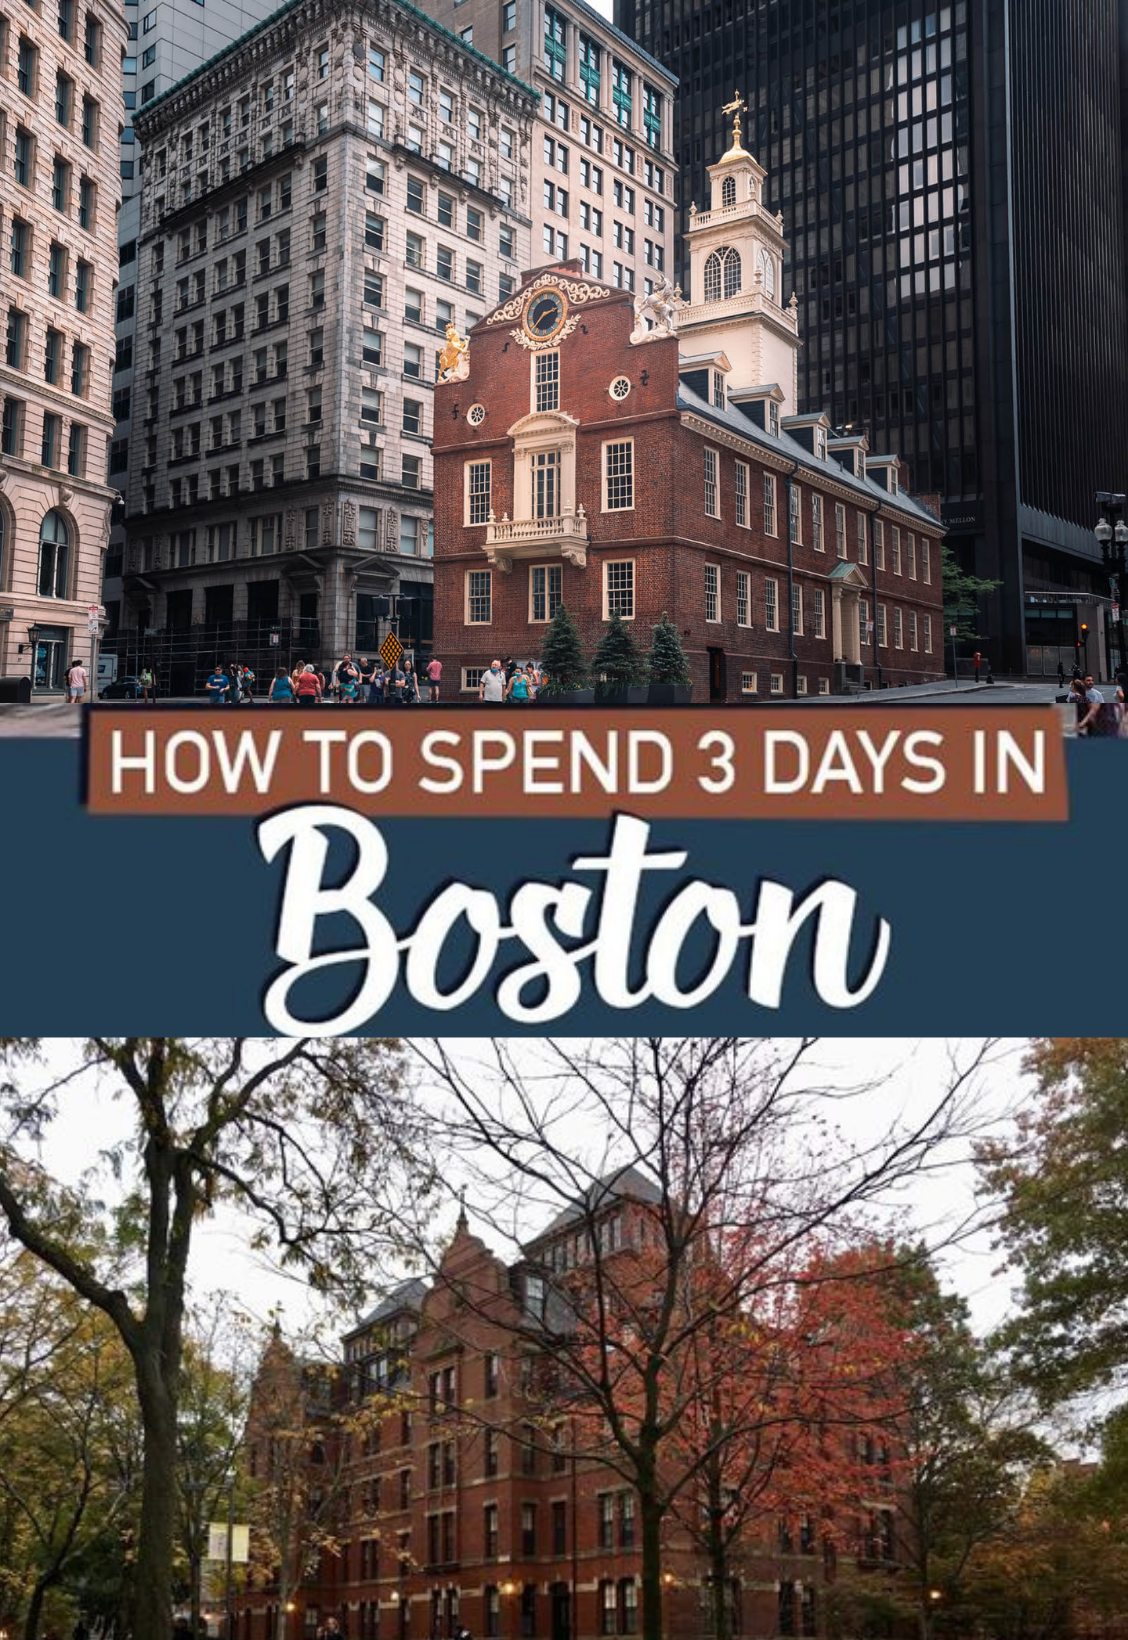 How to spend 3 days in Boston